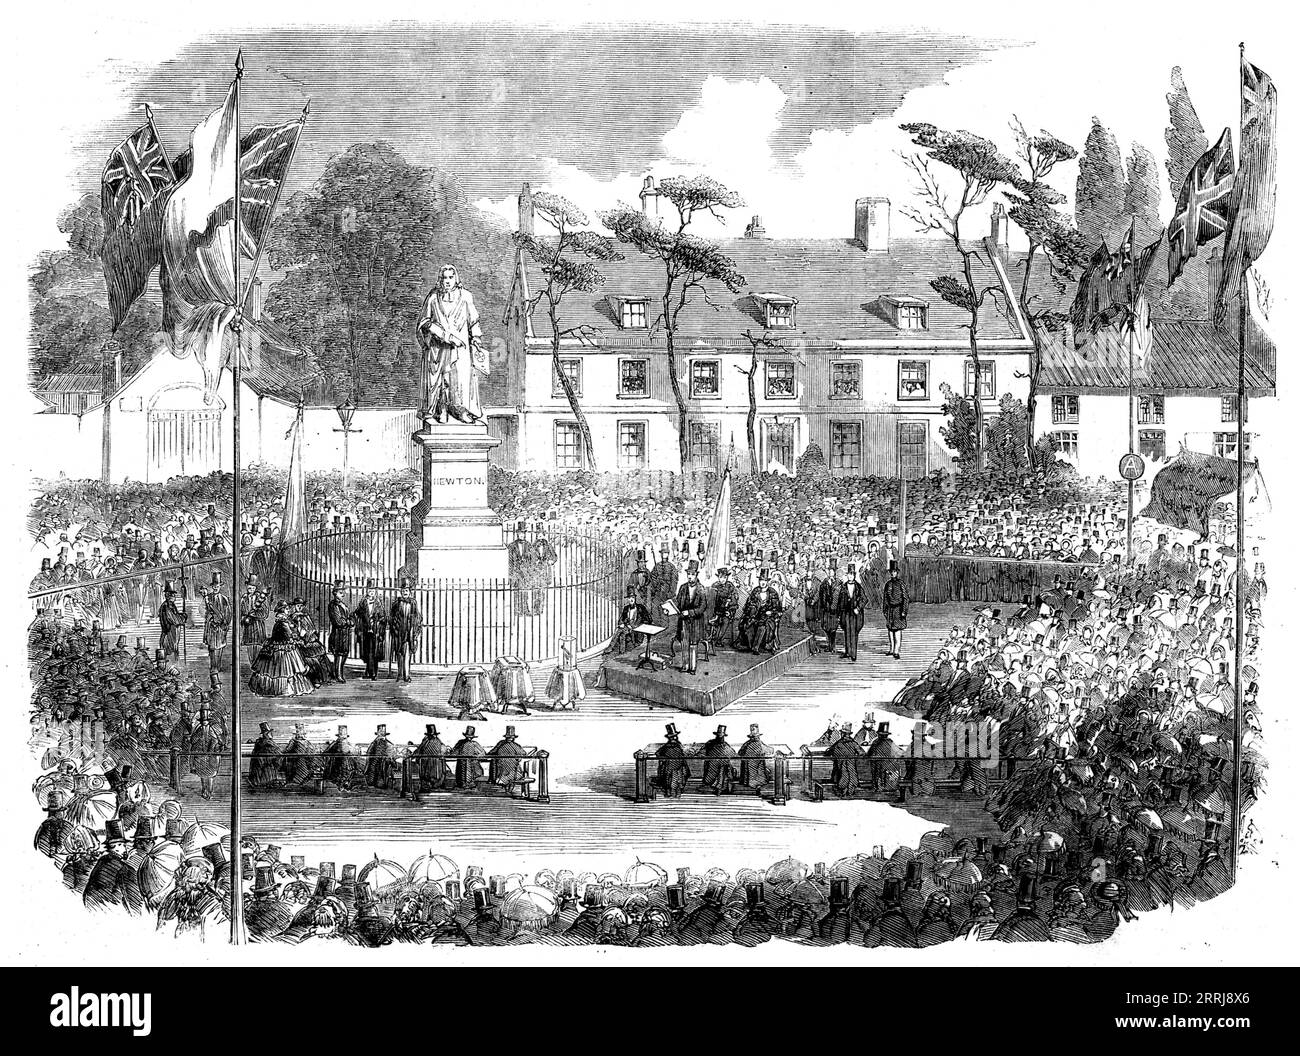 Inauguration of the Statue of Sir Isaac Newton at Grantham, 1858. 'The statue of the great mathematician and astronomer, from the hand of W. Theed, Esq...[was erected] at Grantham, Lincolnshire, near which town Newton was born, and in which he received the rudiments of his education...[It] was inaugurated...with great ceremony, and in the midst of a vast concourse of persons, including many men of science from all parts of the country...the covering, which till now hid the statue from view, was withdrawn, and a chorus of cheers burst from the assemblage. The noble statue stood out in the brigh Stock Photo